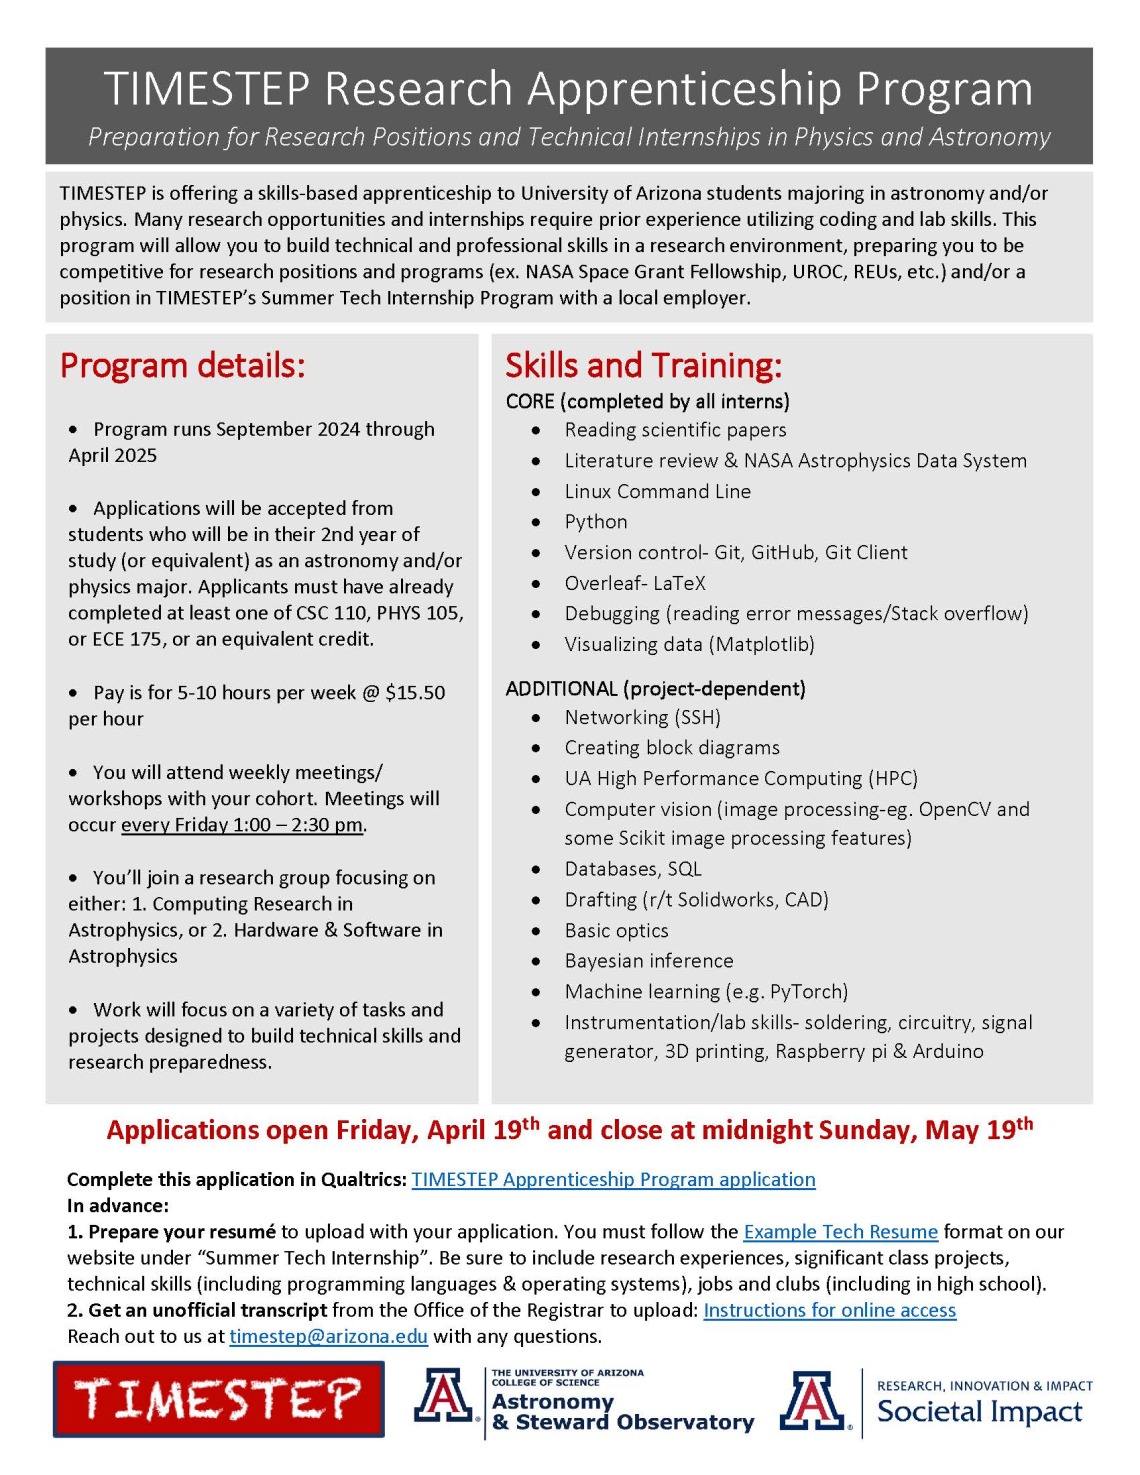 Image of TIMESTEP Research Apprenticeship advertisement